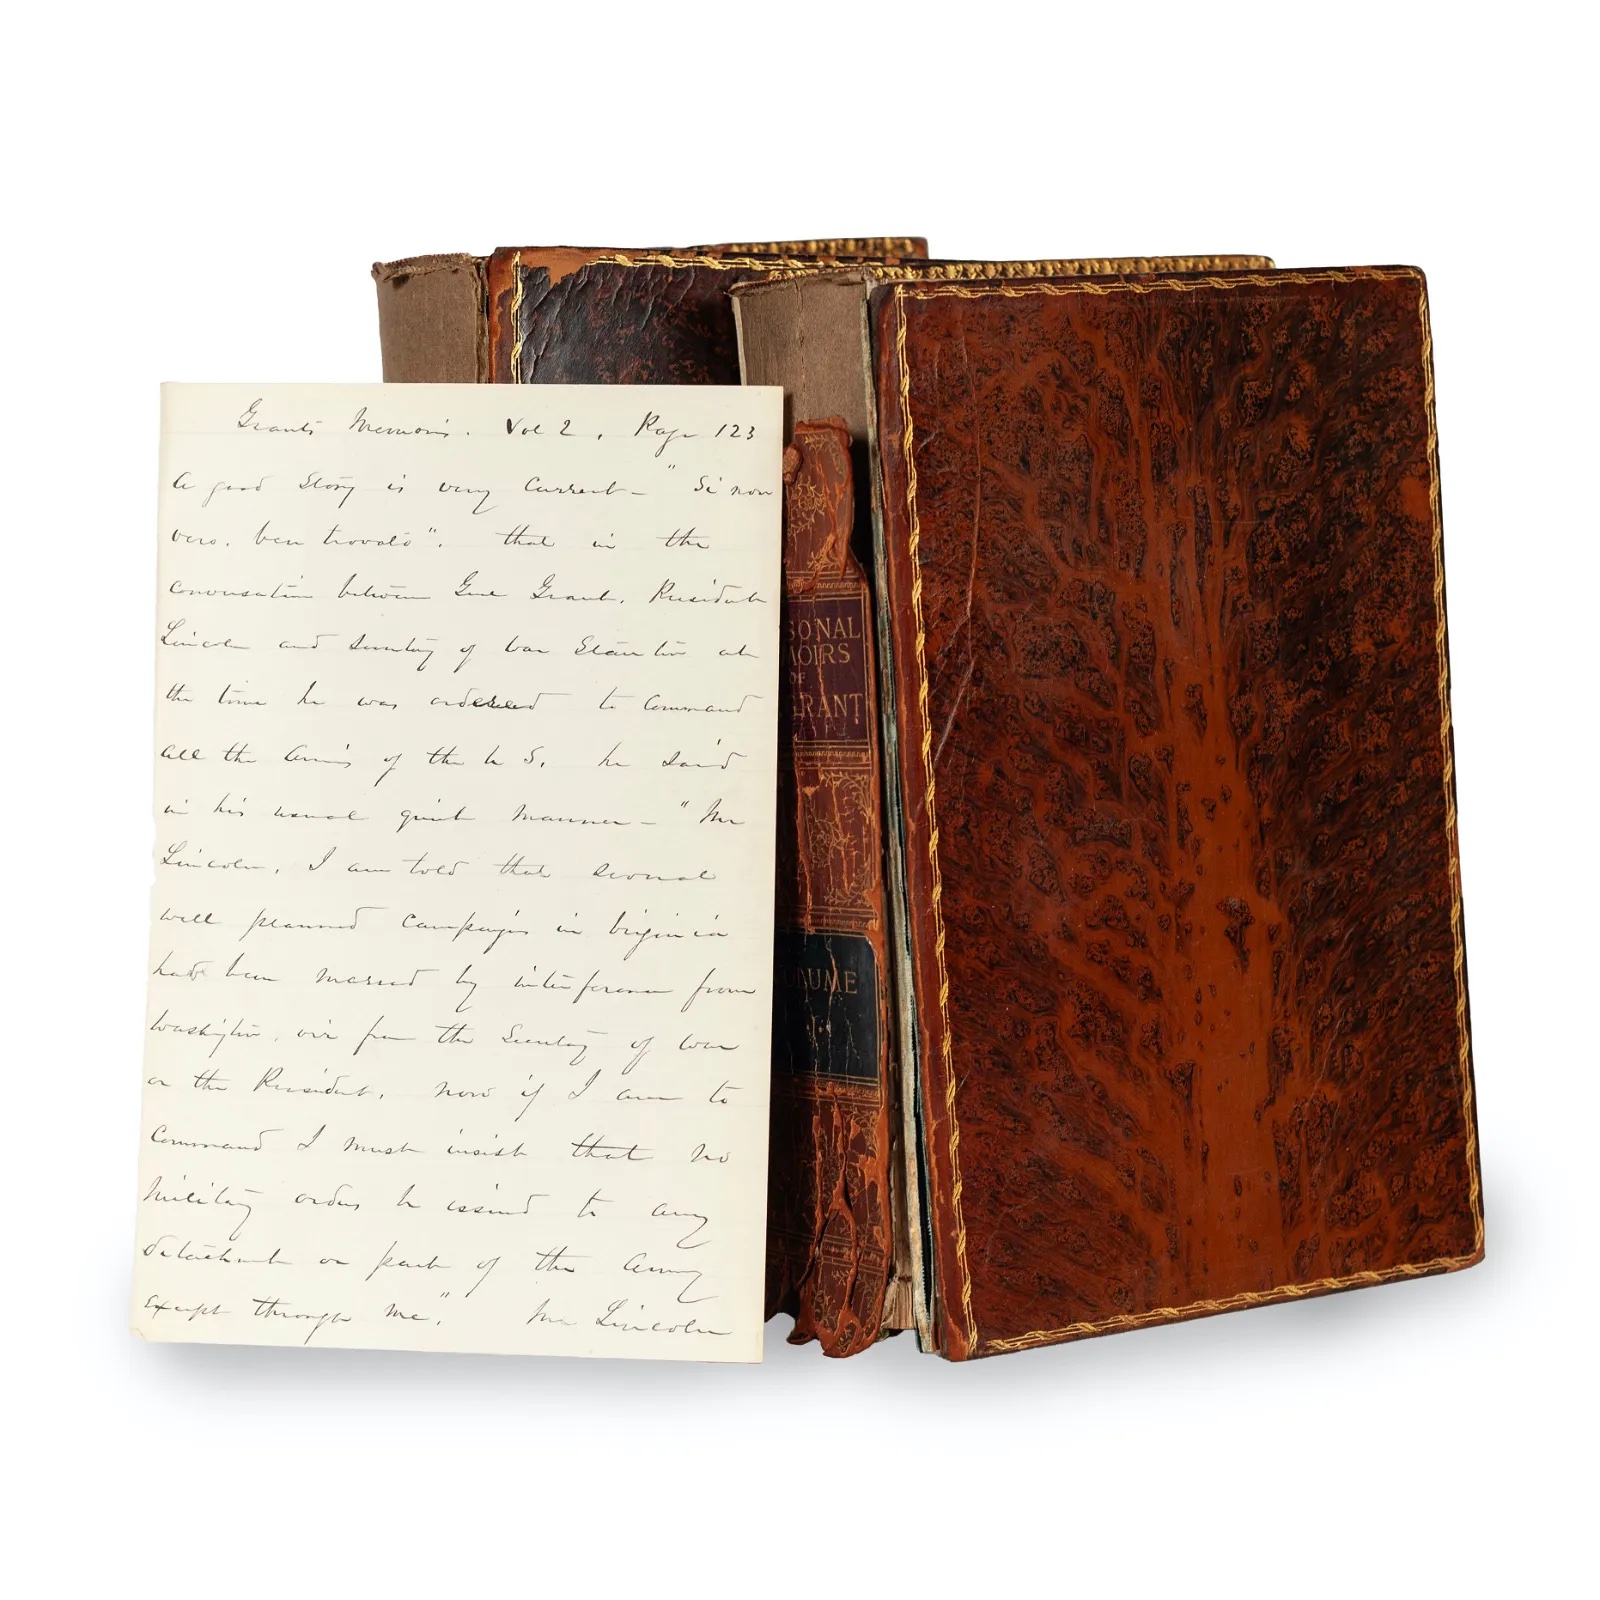 General W. T. Sherman's annotated copy of 'Memoirs of U. S. Grant,' estimated at $7,500-$15,000 at Fleischer's.